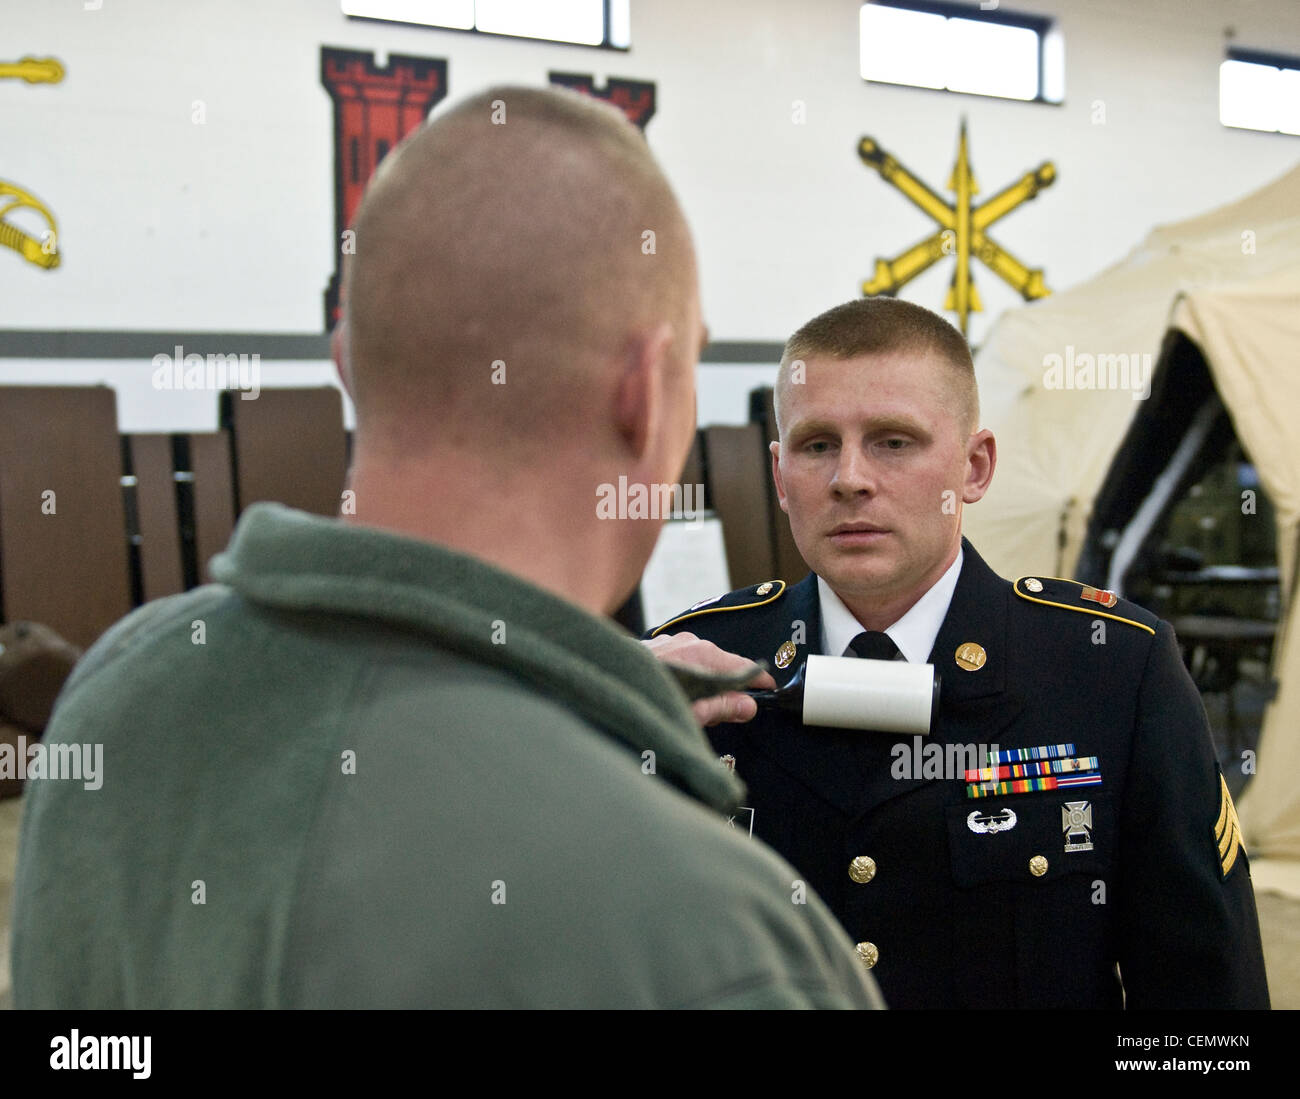 MARSEILLES, Ill.-- Sgt. Kyle Schick of Hustisford Wis., who is a Interior Electrician with the 372nd Engineer Company out of Pewaukee, Wis., gets his uniform checked over by his sponsor before his board appearance at the 2012 372nd Engineer Brigades Best Warrior Competition on Feb. 16. Stock Photo